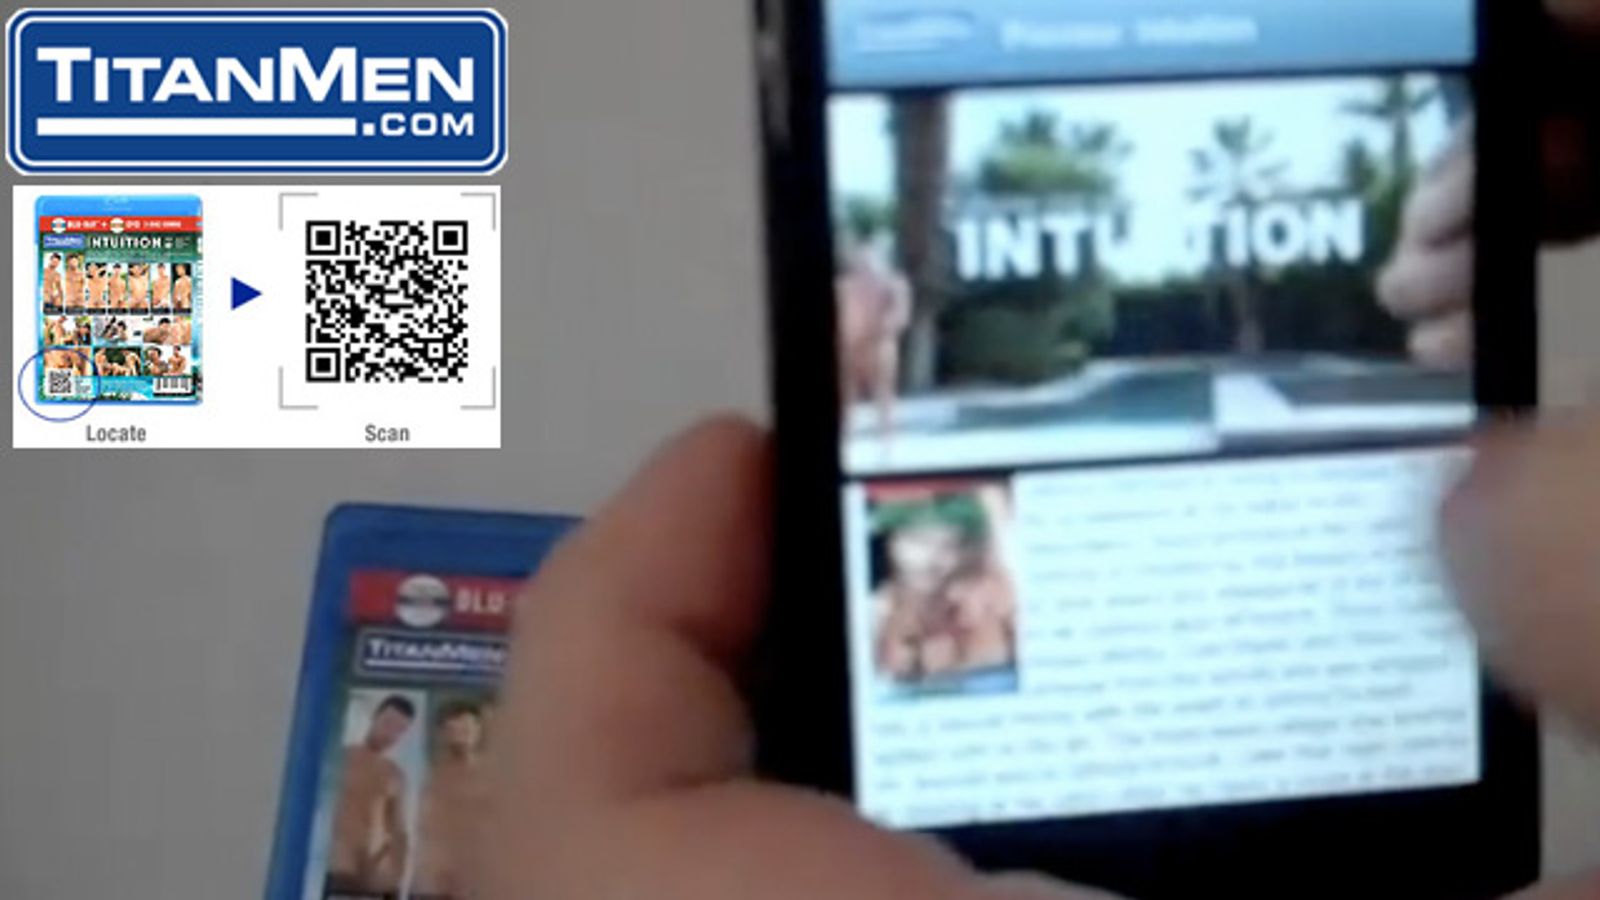 TitanMen Q.R. Codes Allows Consumers to Watch Mobile Trailers In-Store